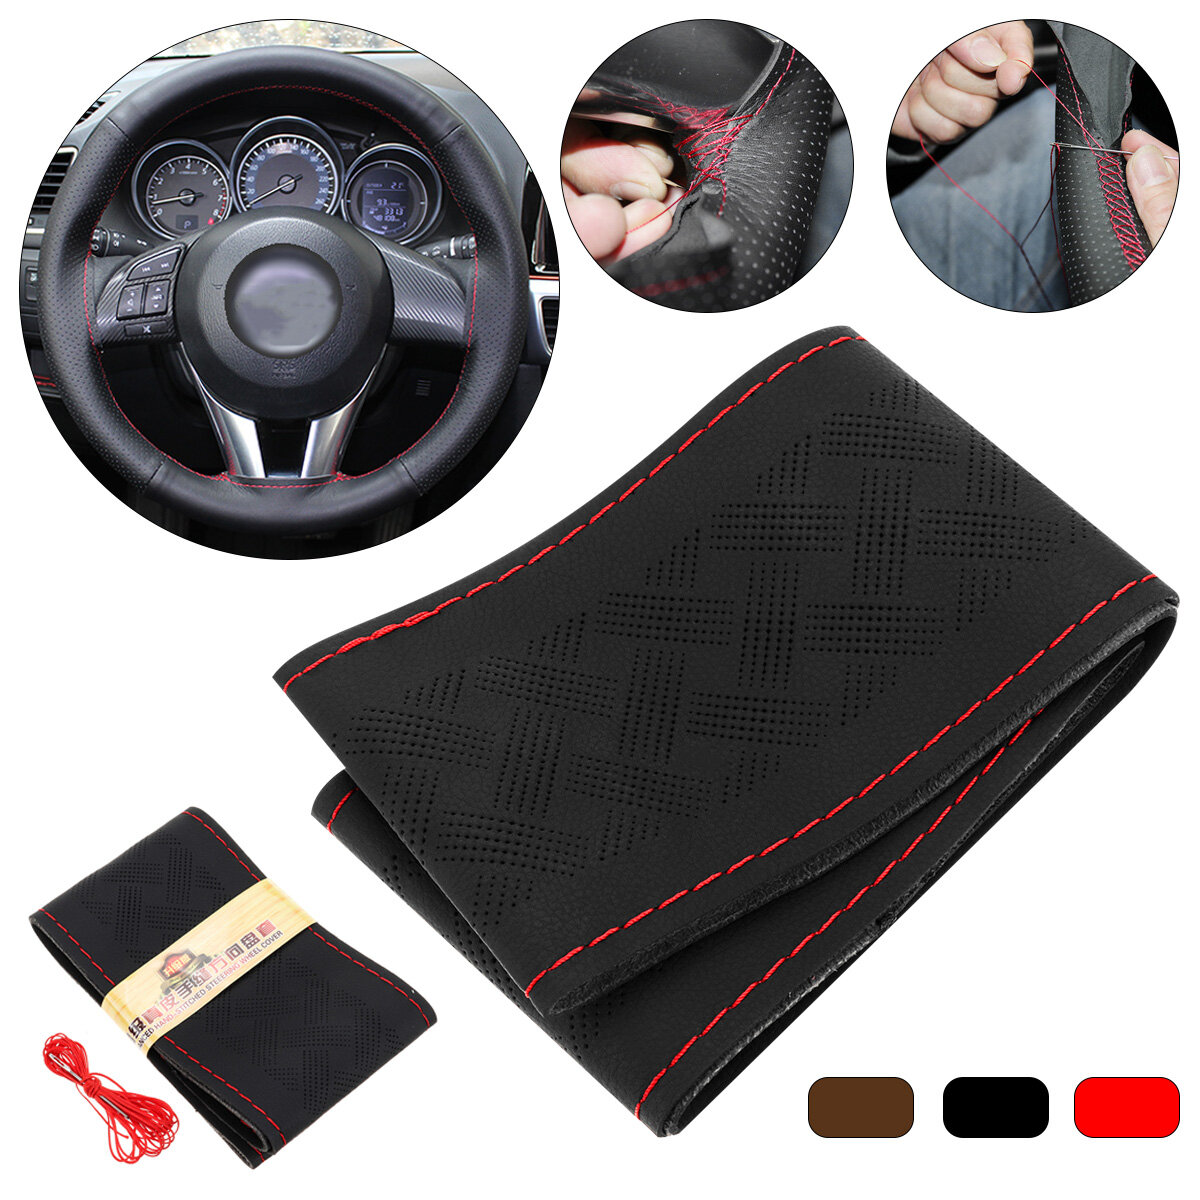 36/38cm Car Truck Leather Steering Wheel Cover + Needles Thread Multi-color